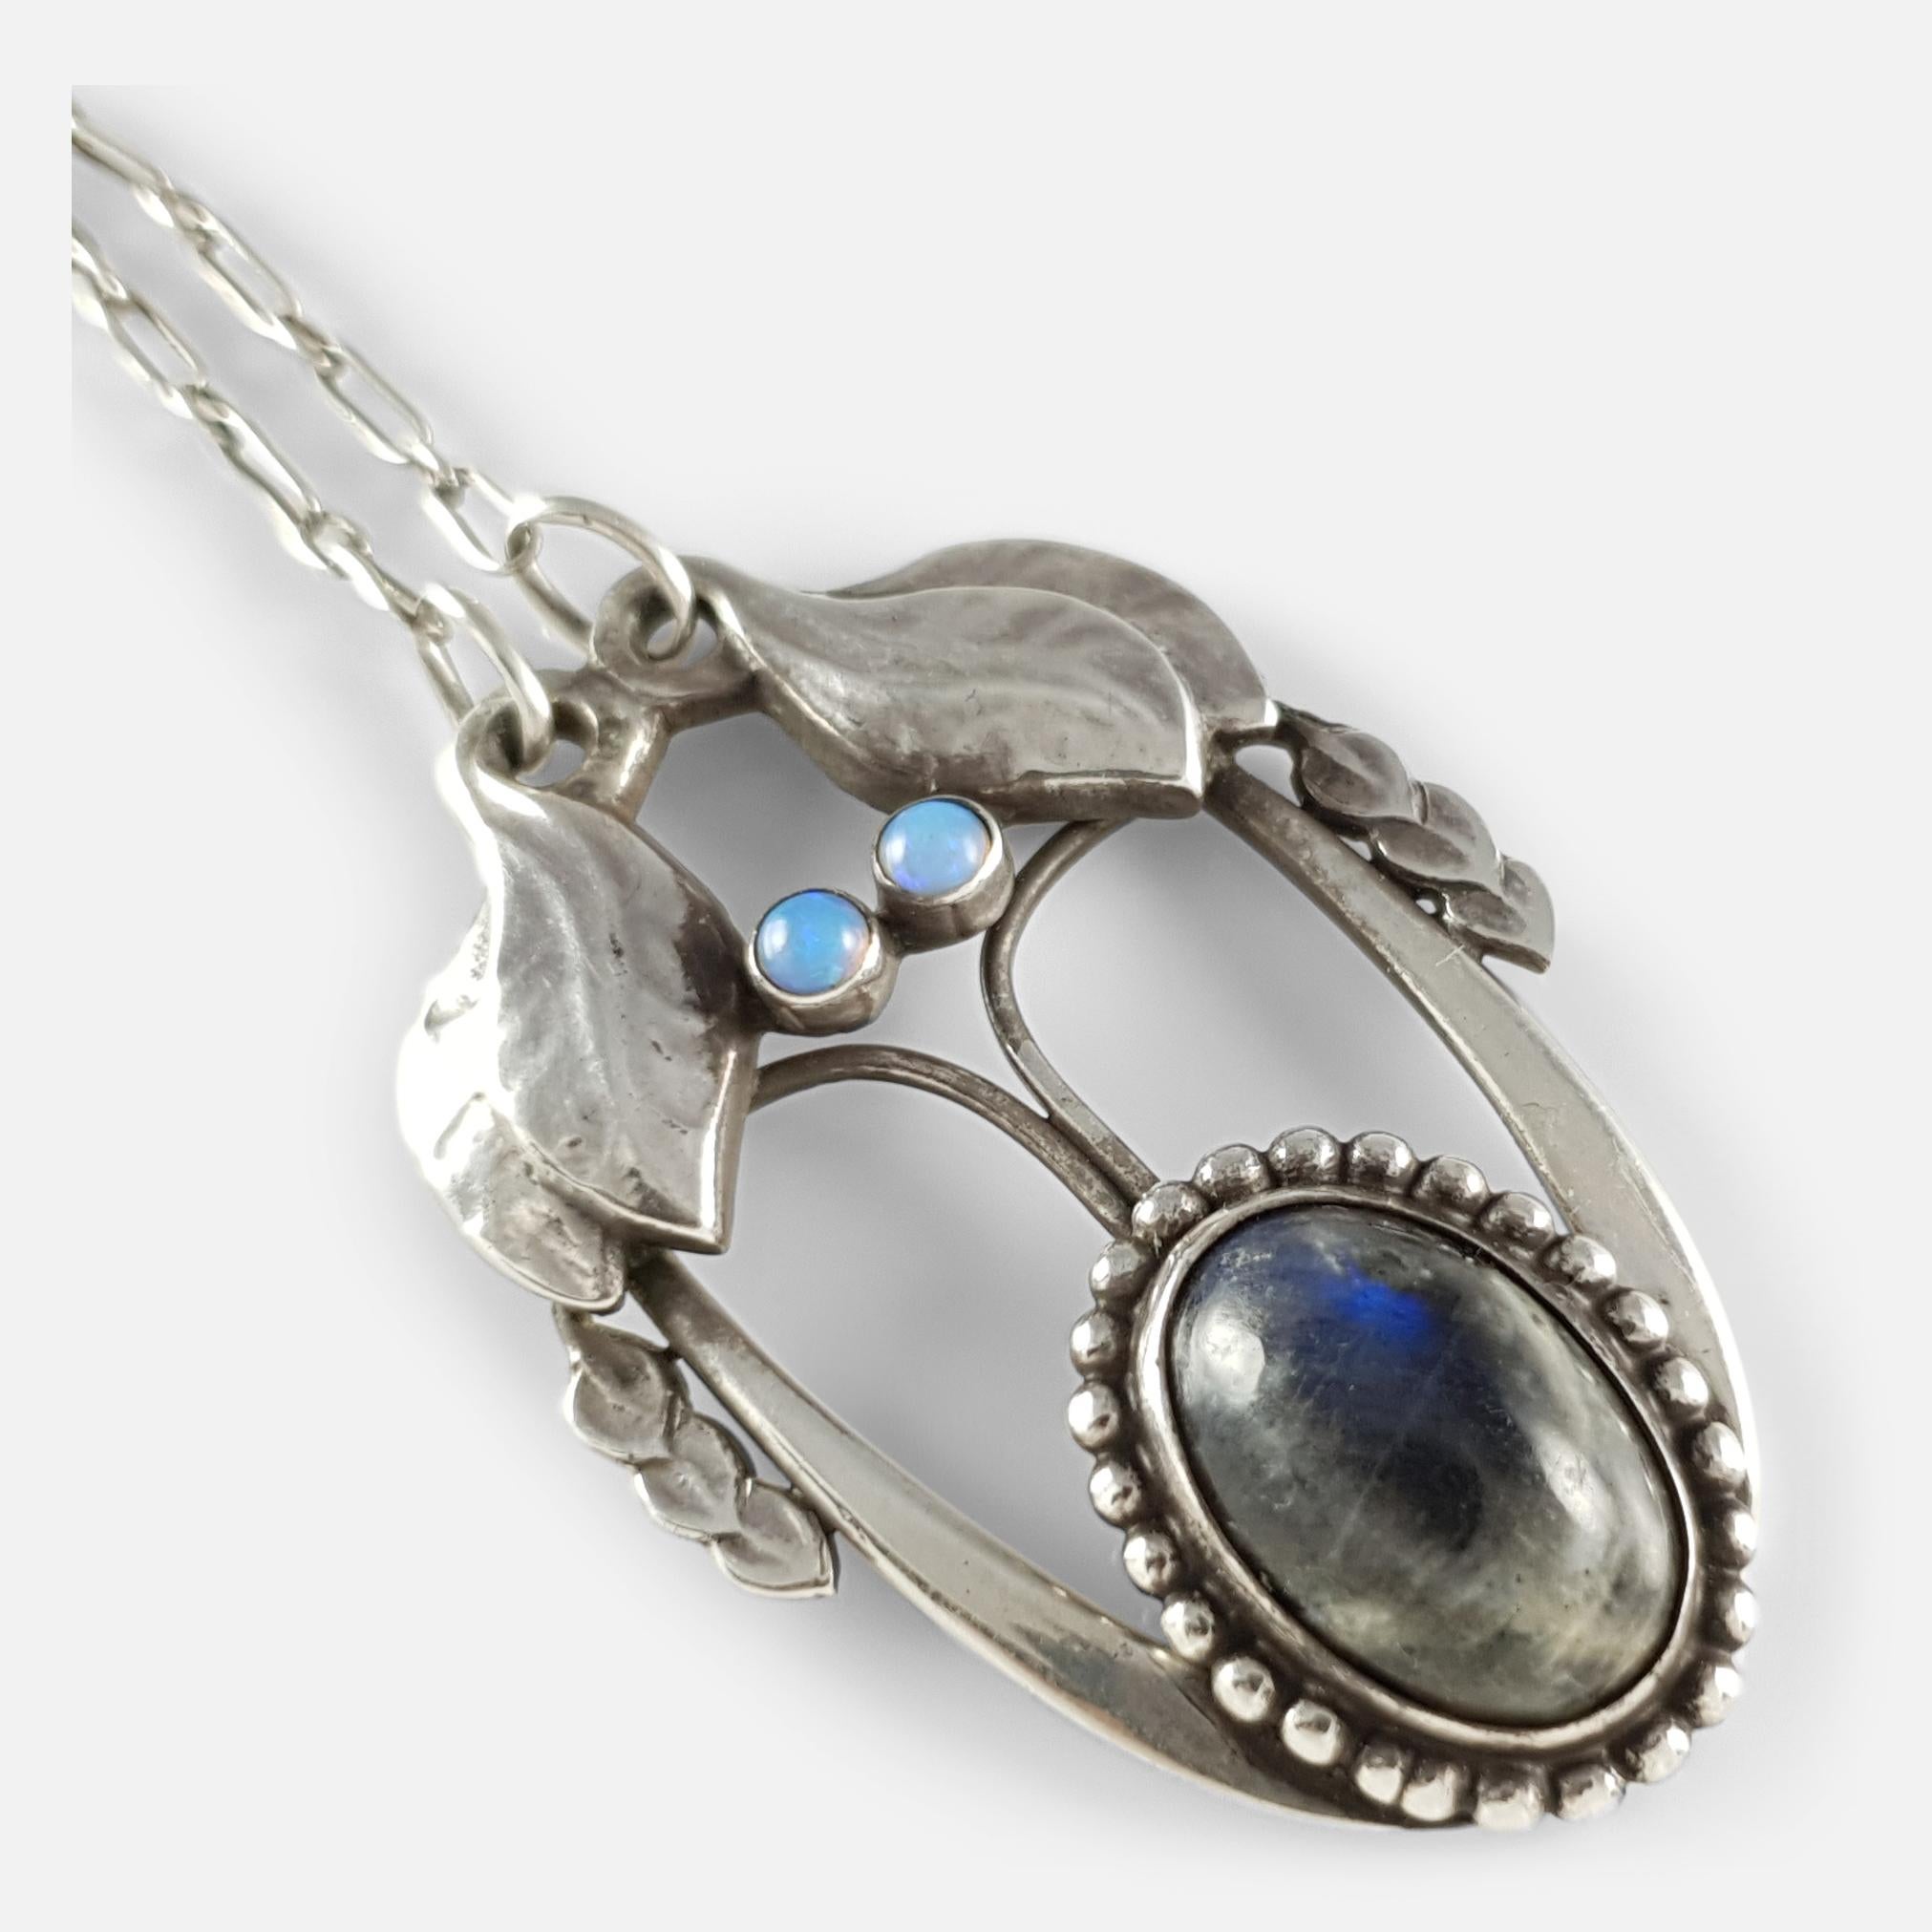 A Georg Jensen silver opal and labradorite cabochon pendant #4 with chain, circa 1904-1908. The foliate silver pendant is set with an oval labradorite cabochon within a beaded border and two further opal cabochons, leading to a silver chain with